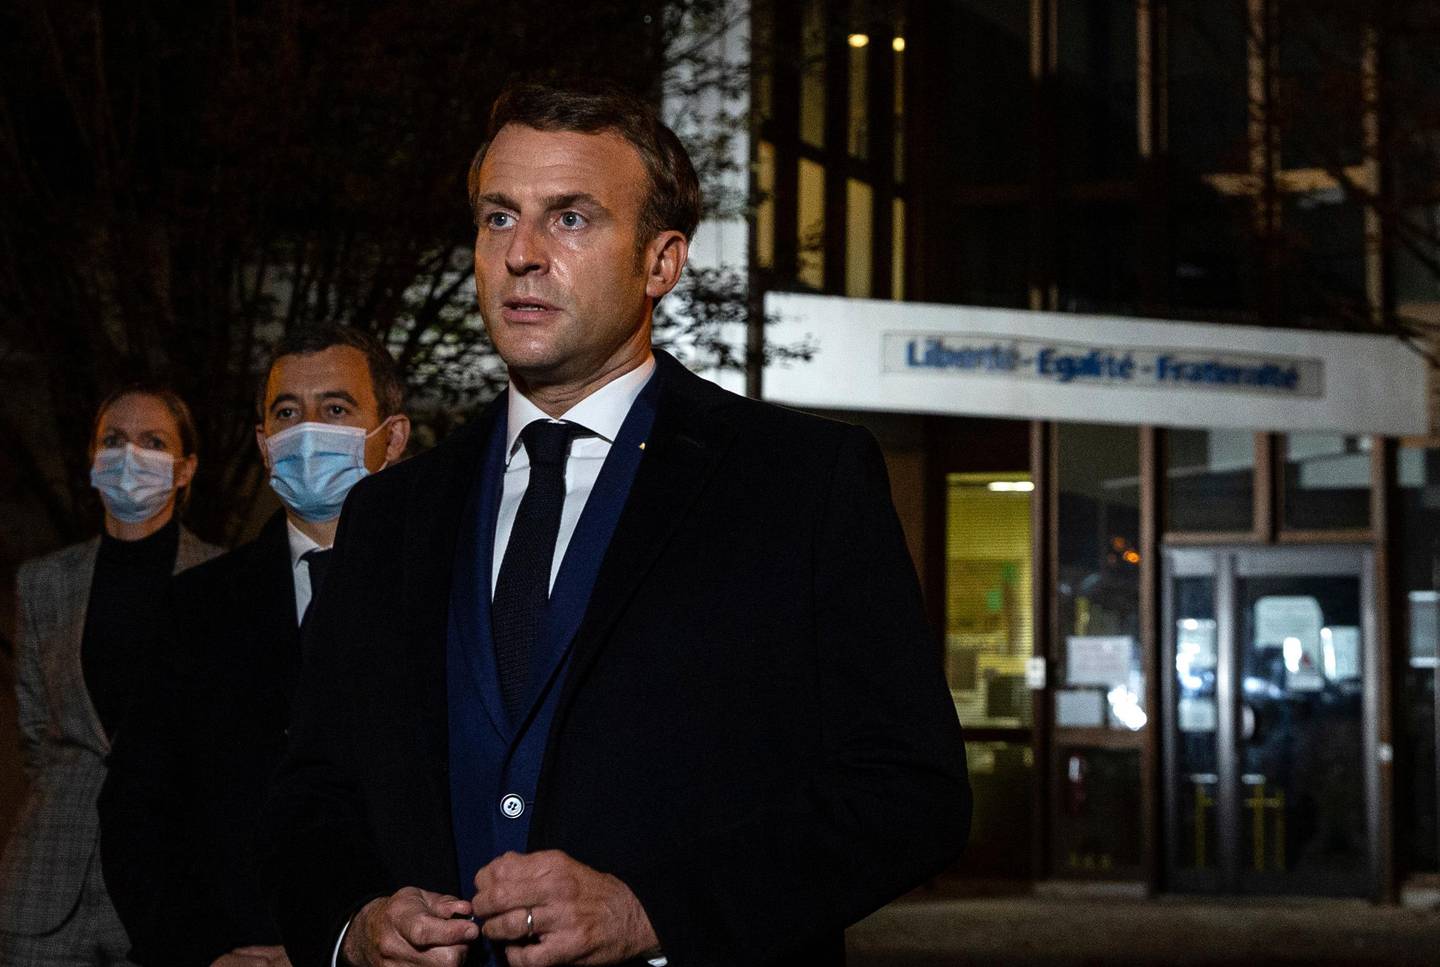 French President Emmanuel Macron, flanked by French Interior Minister Gerald Darmanin, second left, speaks in front of a high school Friday Oct.16, 2020 in Conflans Sainte-Honorine, northwest of Paris, after a history teacher who opened a discussion with high school students on caricatures of Islam's Prophet Muhammad was beheaded. French President Emmanuel Macron denounced what he called an "Islamist terrorist attack" against a history teacher decapitated in a Paris suburb Friday, urging the nation to stand united against extremism. (Abdulmonam Eassa, Pool via AP)